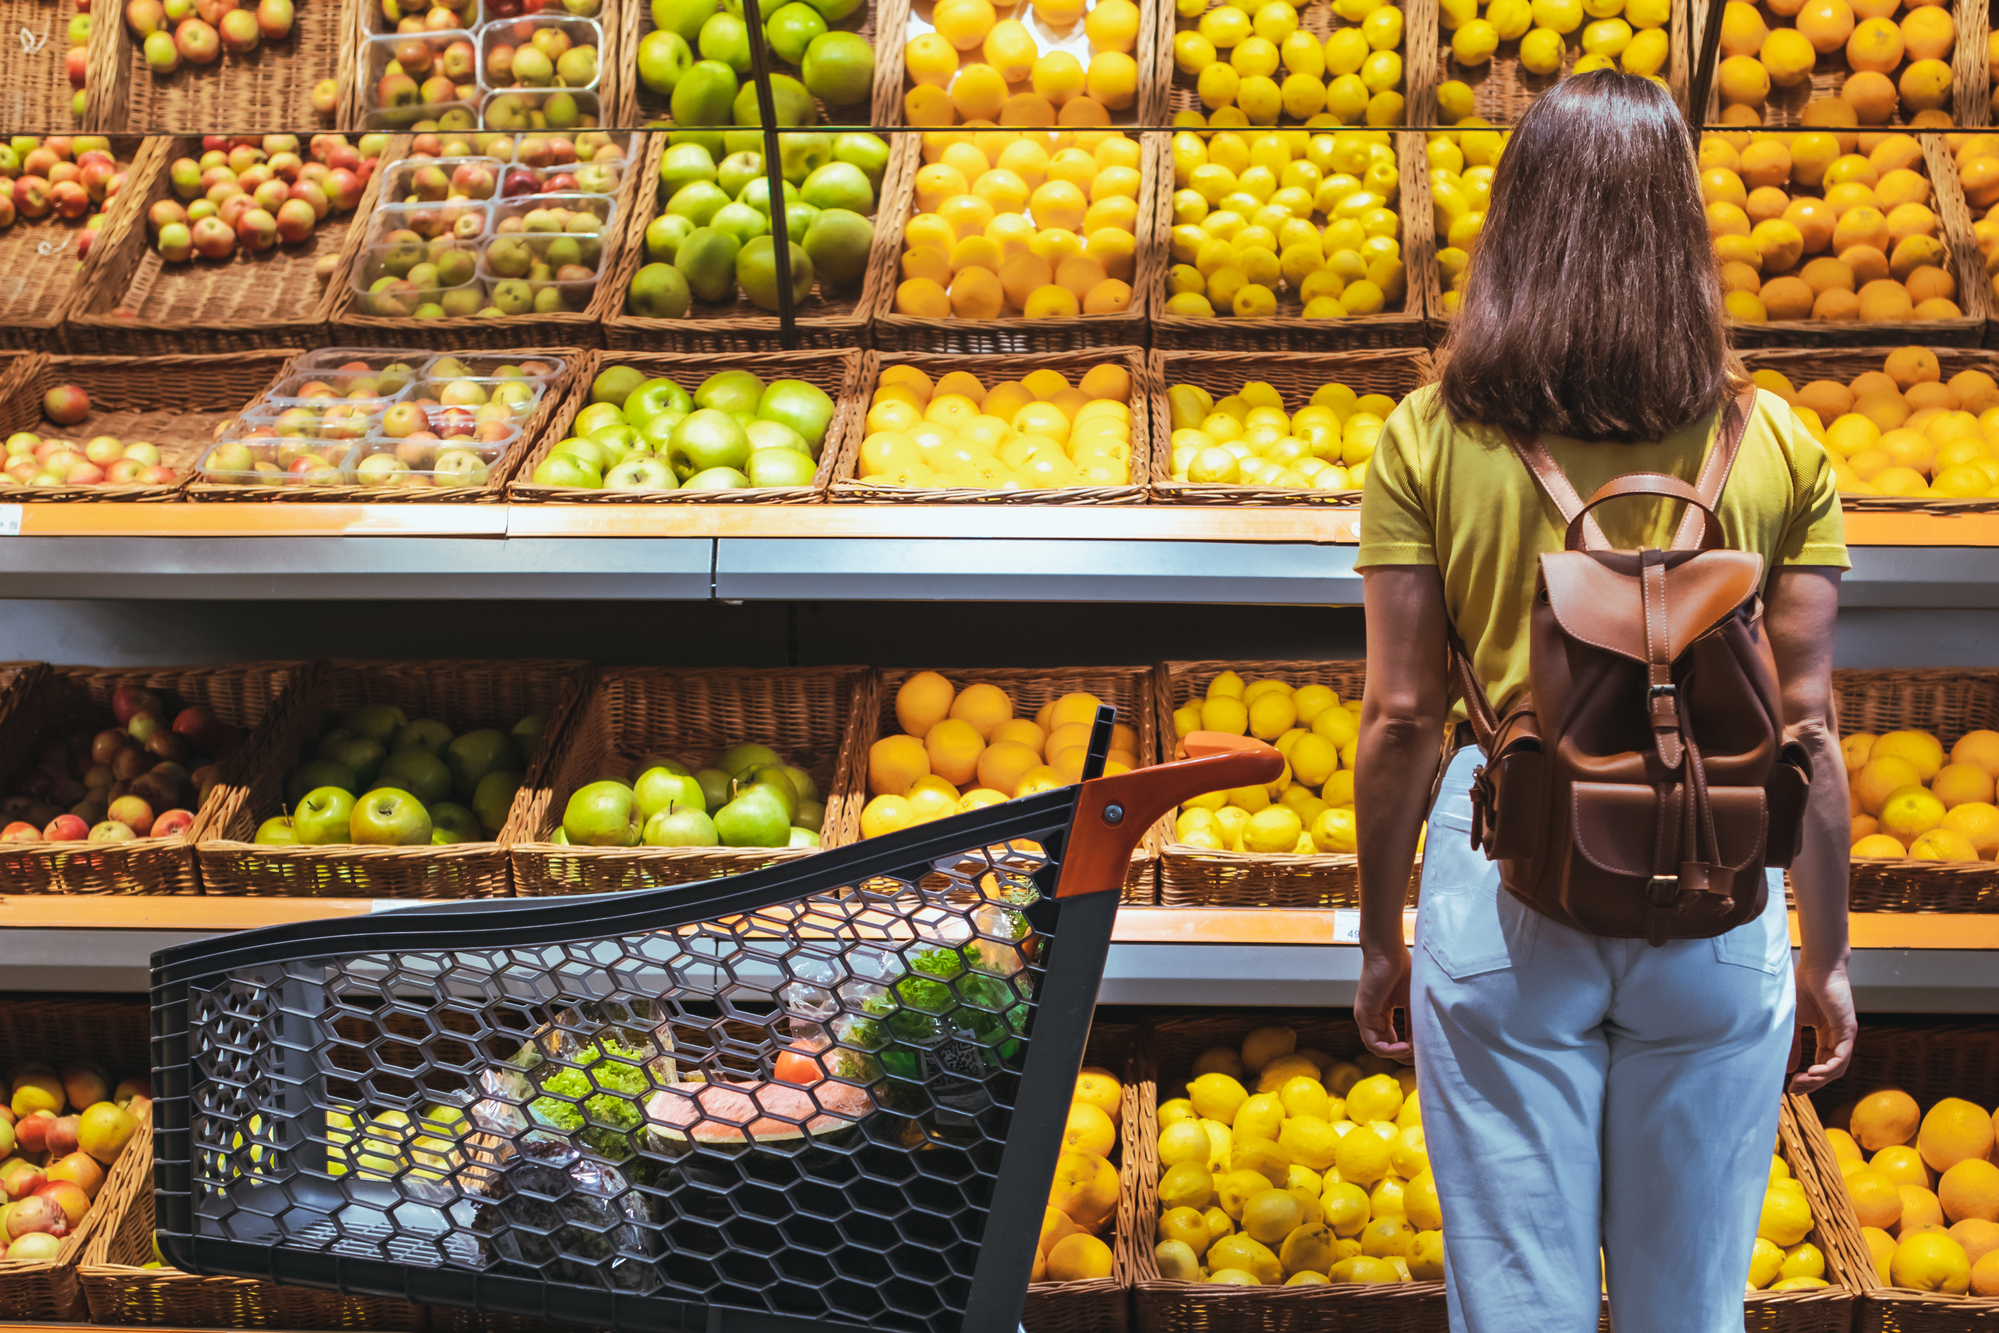 Is Shoplifting from Grocery Stores Morally Permissible?